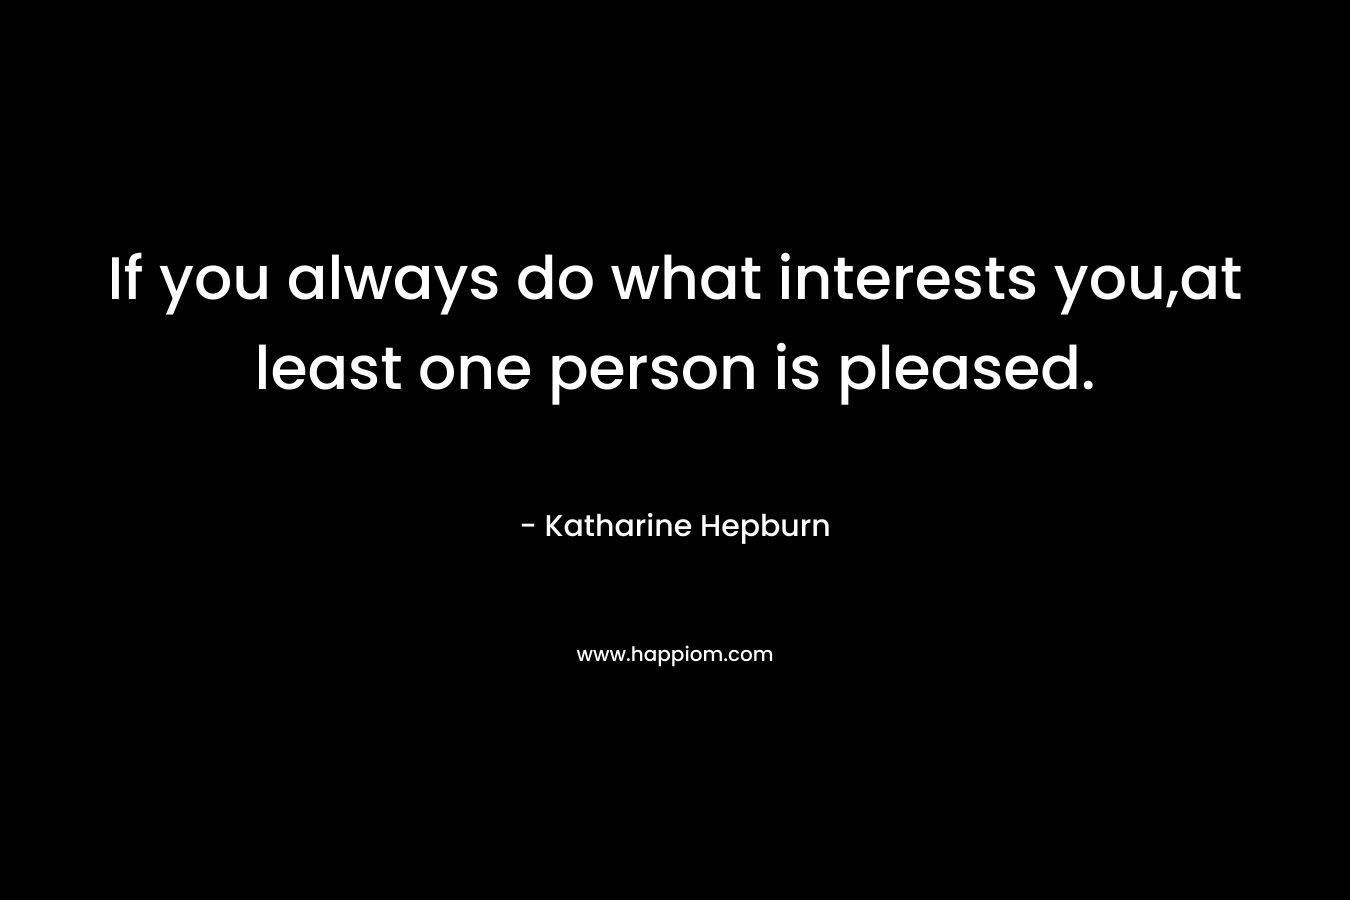 If you always do what interests you,at least one person is pleased. – Katharine Hepburn